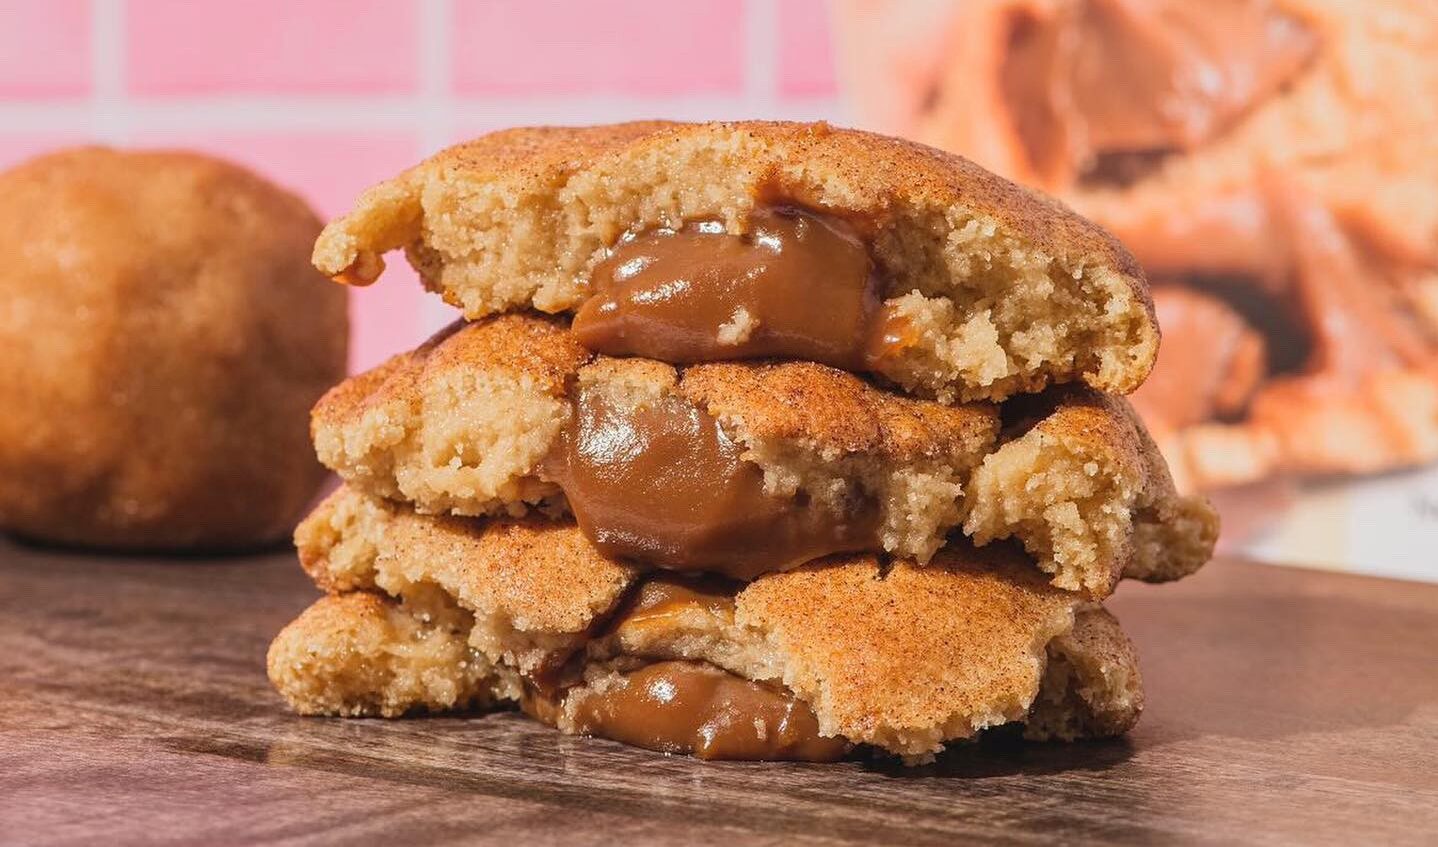 La Gringuita cookie broken in half on a kitchen counter with gooey caramel dripping out of the middle of the cookie stack